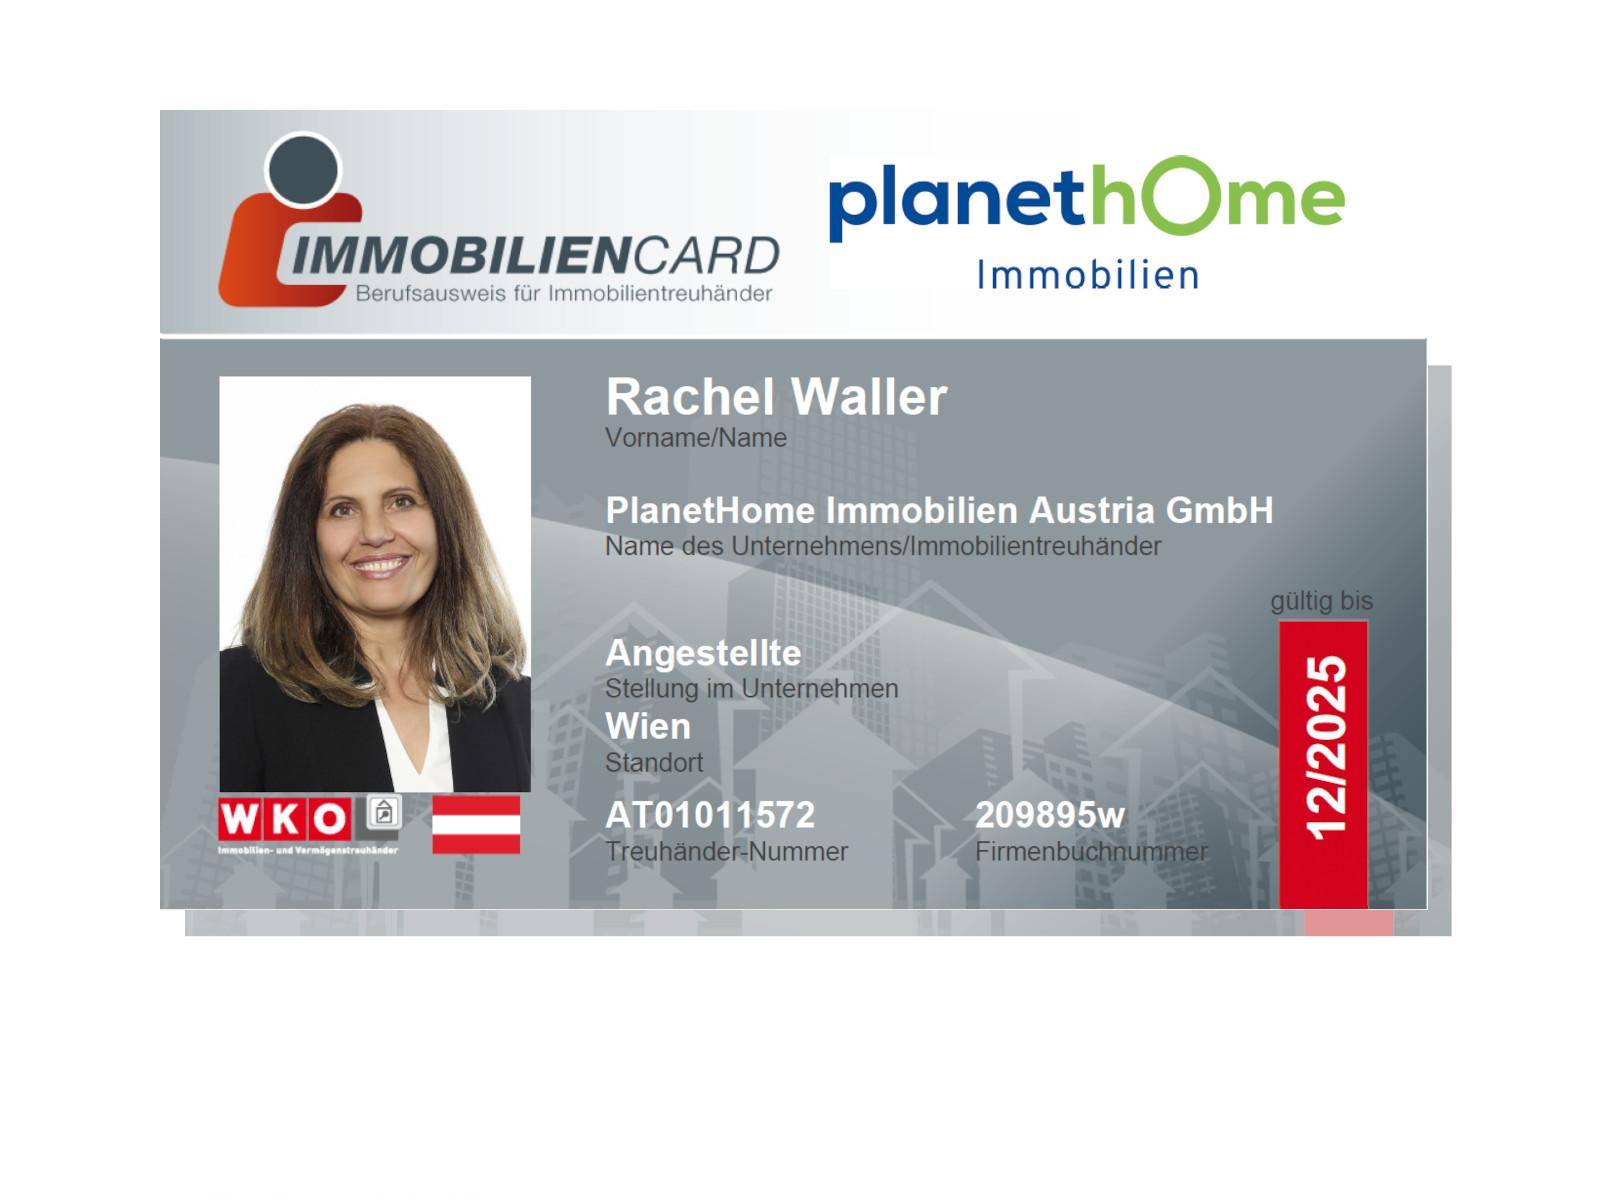 Immobiliencard